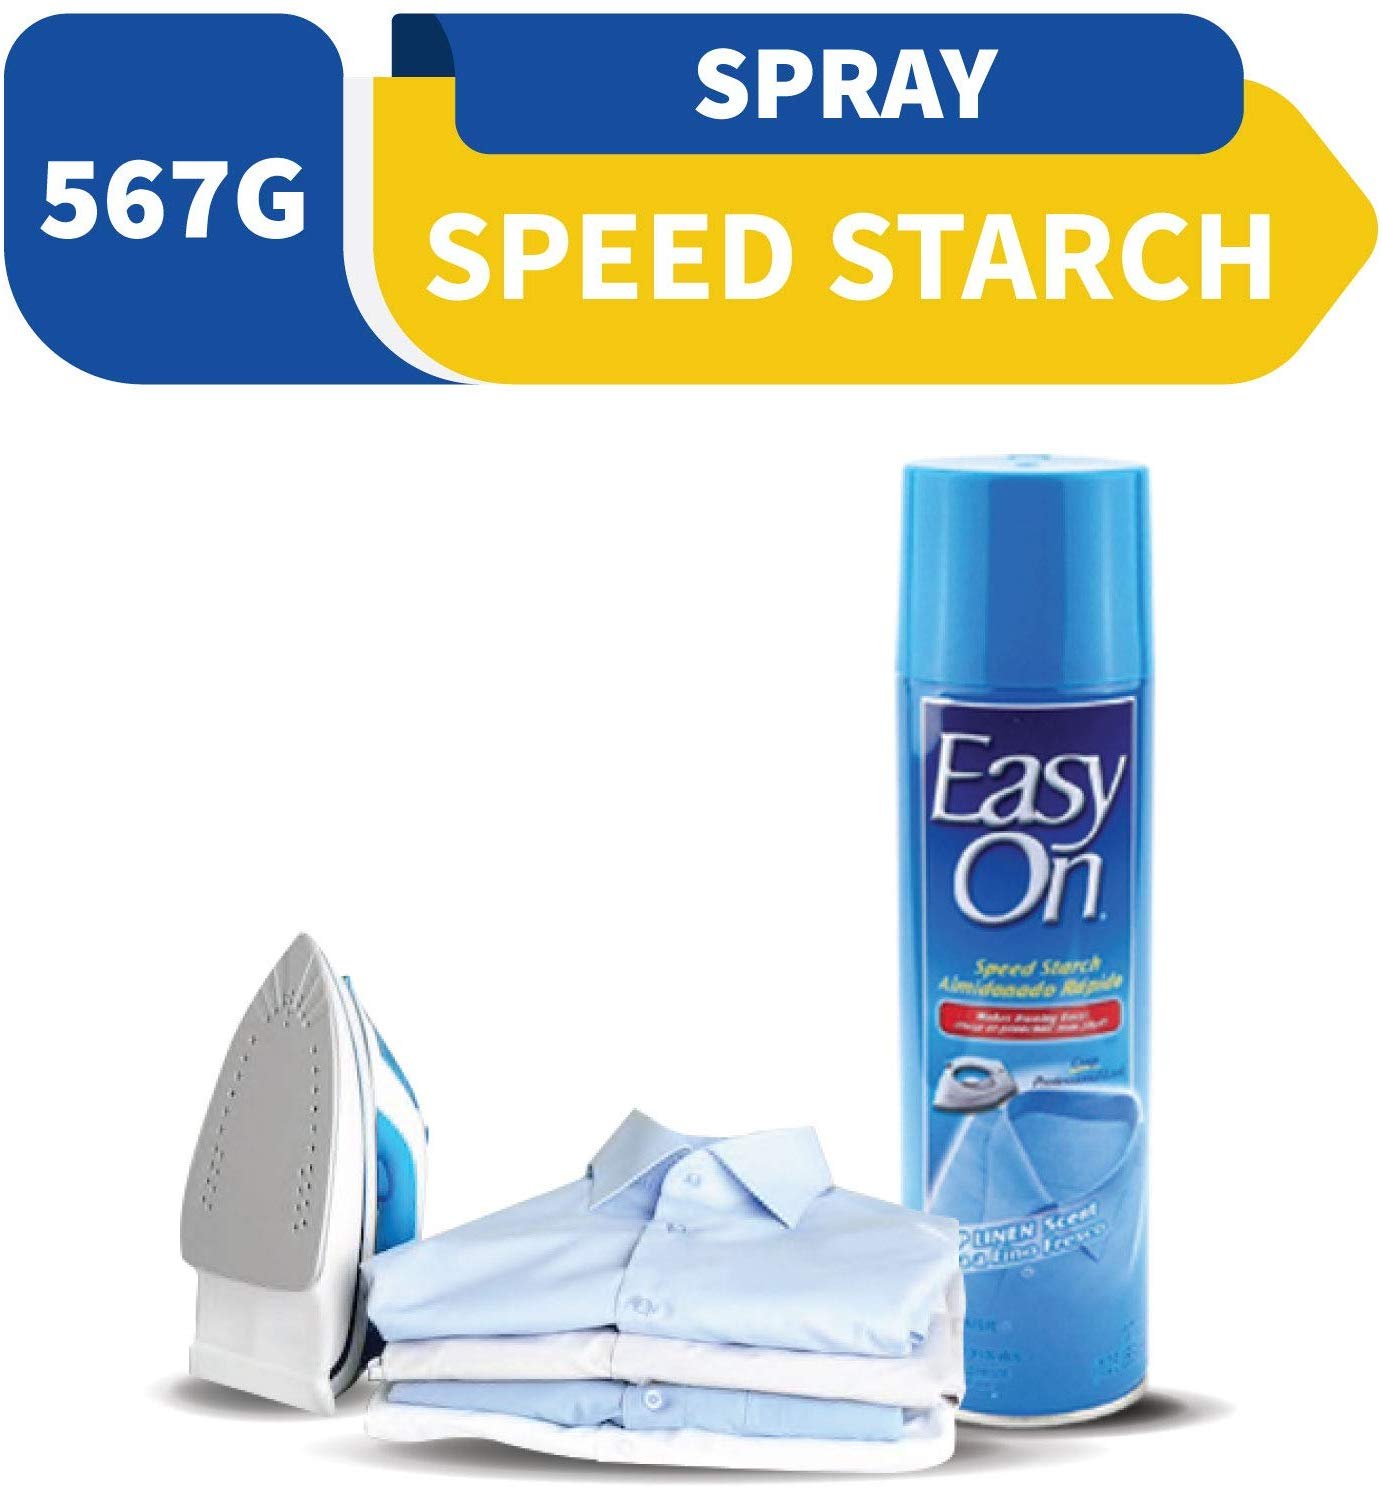 EASY ON DOUBLE STARCH Spray Starch CRISP LINEN SCENT (20 oz)